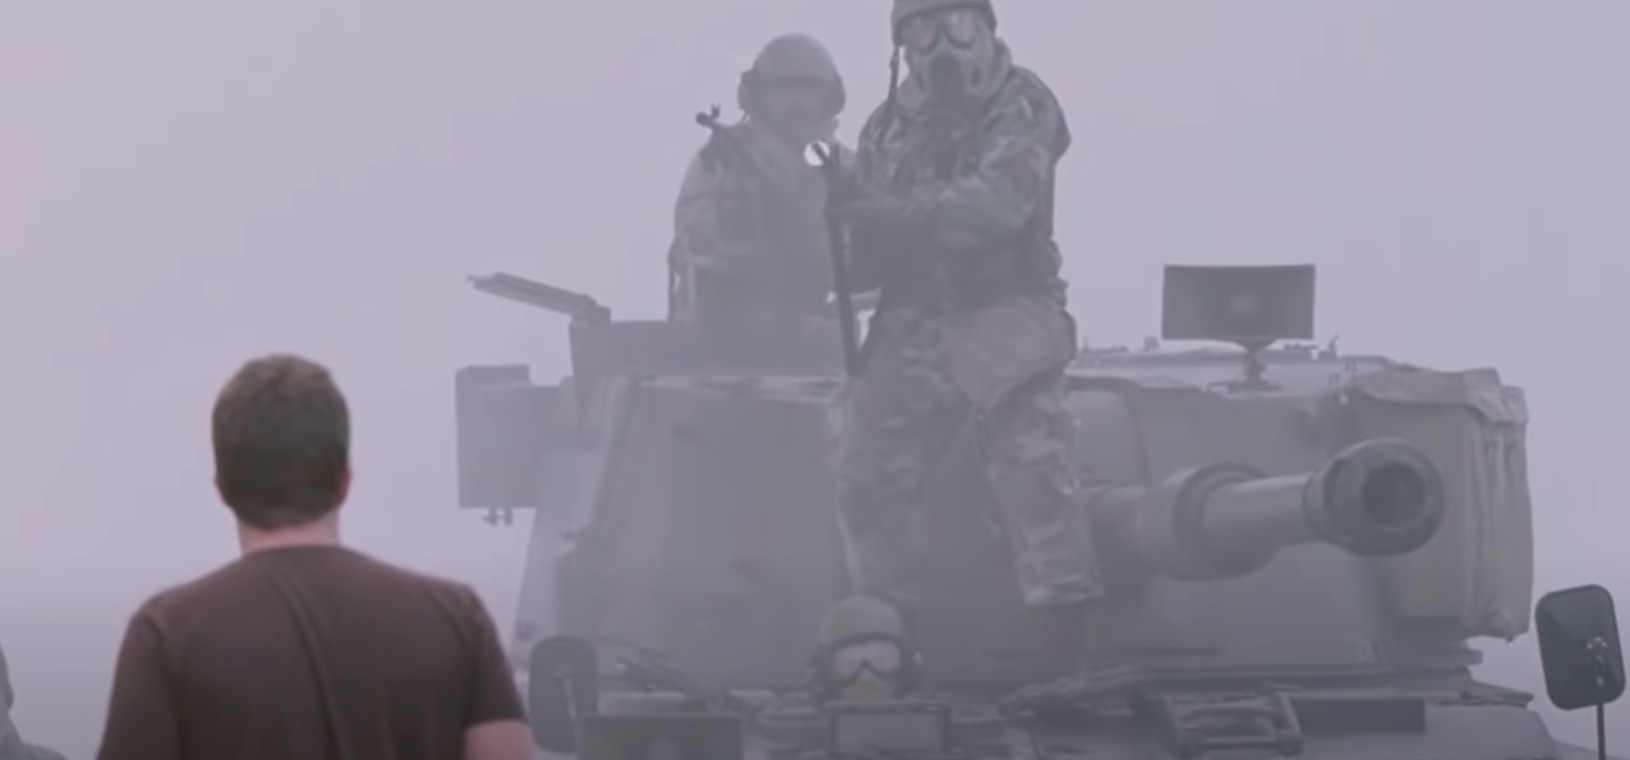 An army vehicle emerges through the mist